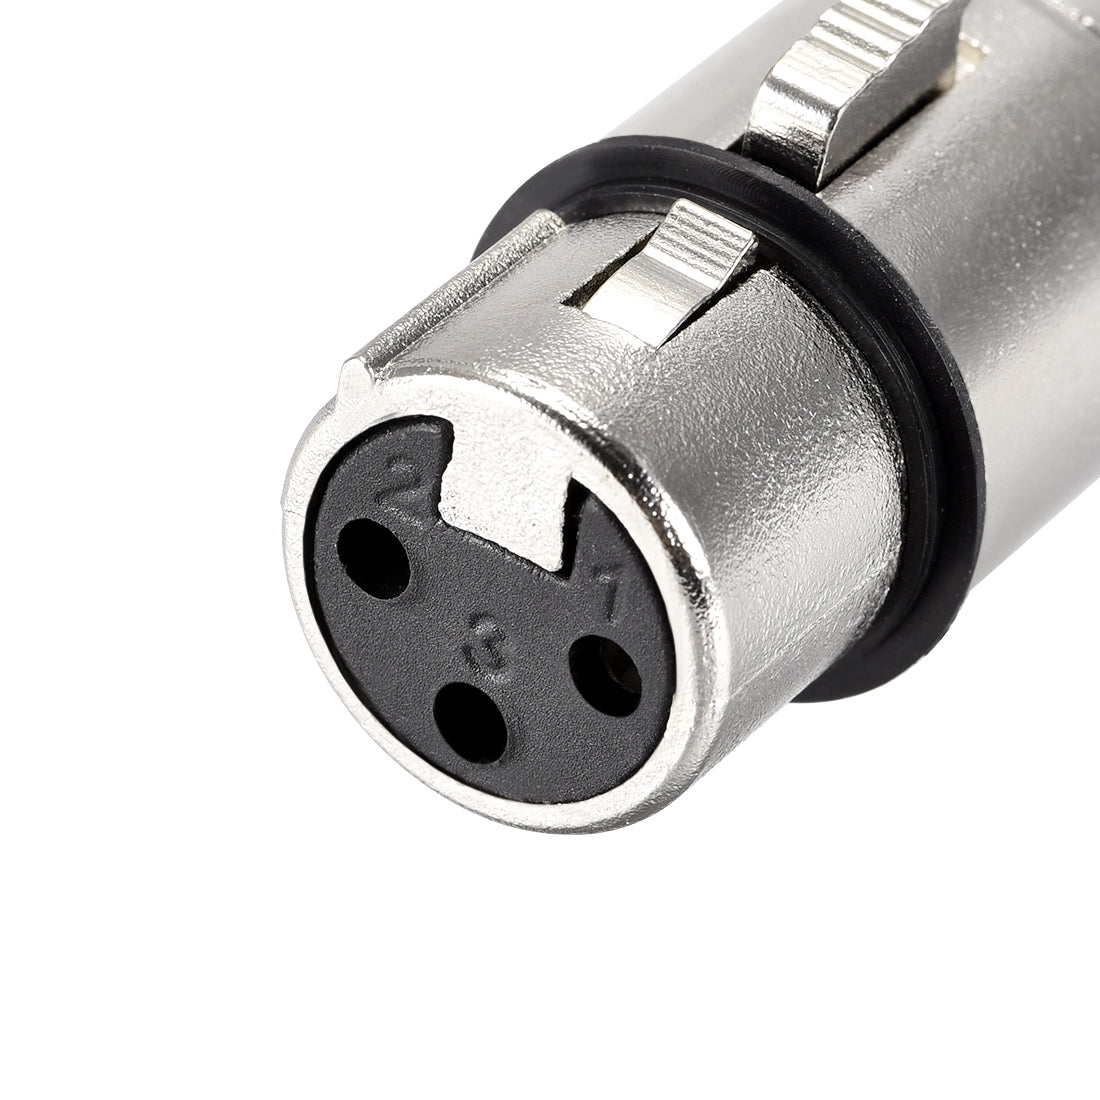 uxcell Uxcell XLR Female to 1/8" Male TRS Adapter,Gender Changer - XLR-F to 3.5mm Coupler	Adapters,Microphone Plug In Audio Connector,Mic Female Plug